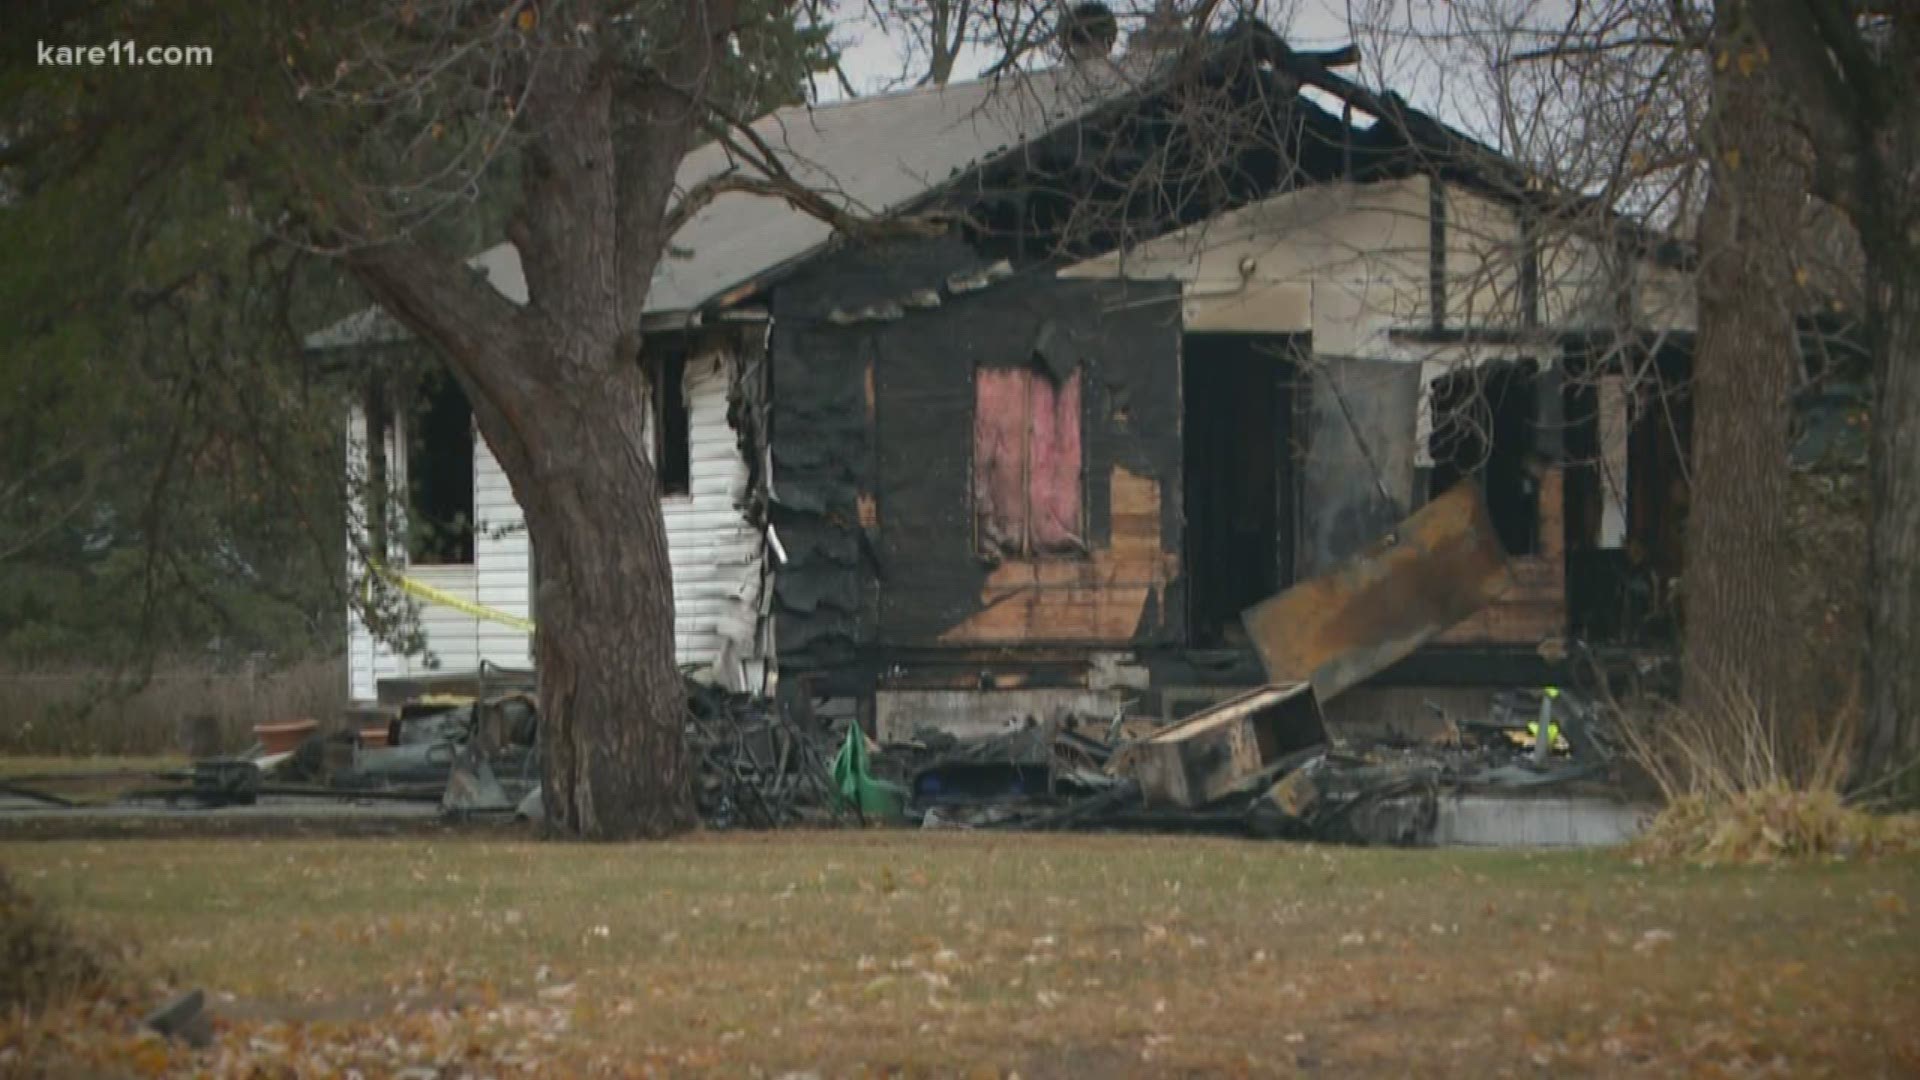 Firefighters found two people dead in a house fire in Spring Lake Park Saturday night.